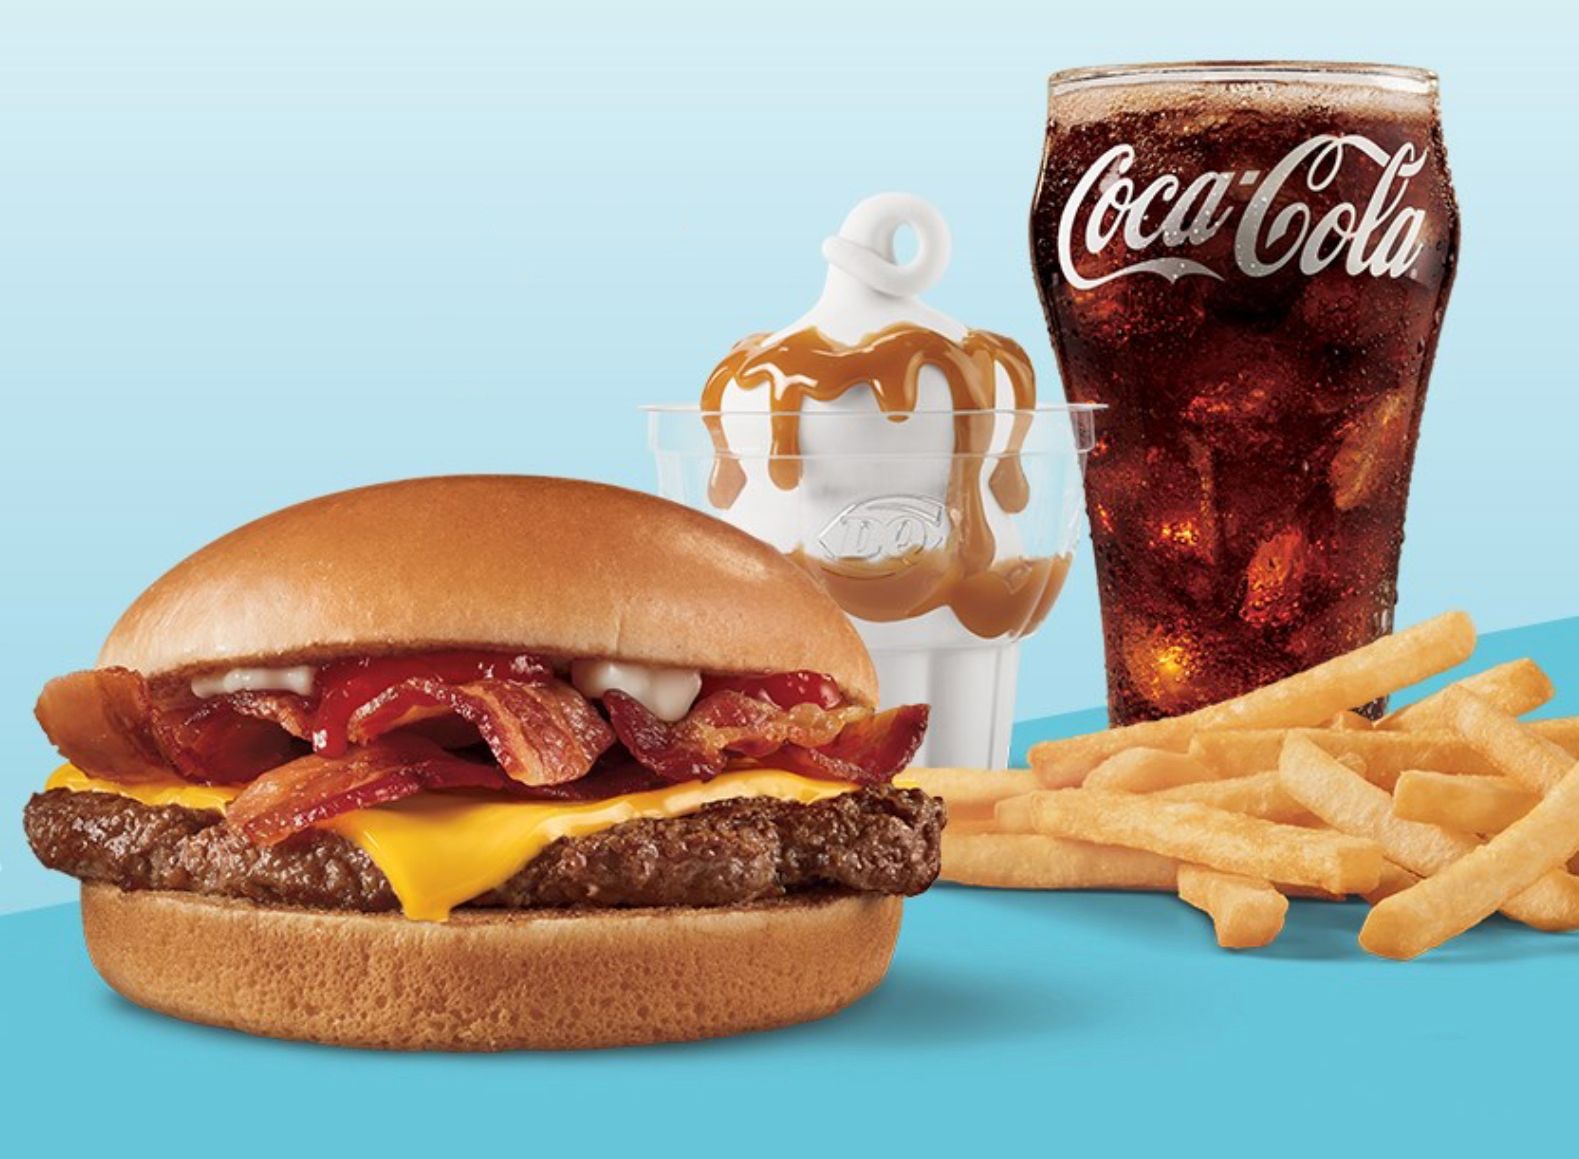 DQ's Bacon Cheeseburger is Now Being Offered with a New $6 Meal Deal at Dairy Queen